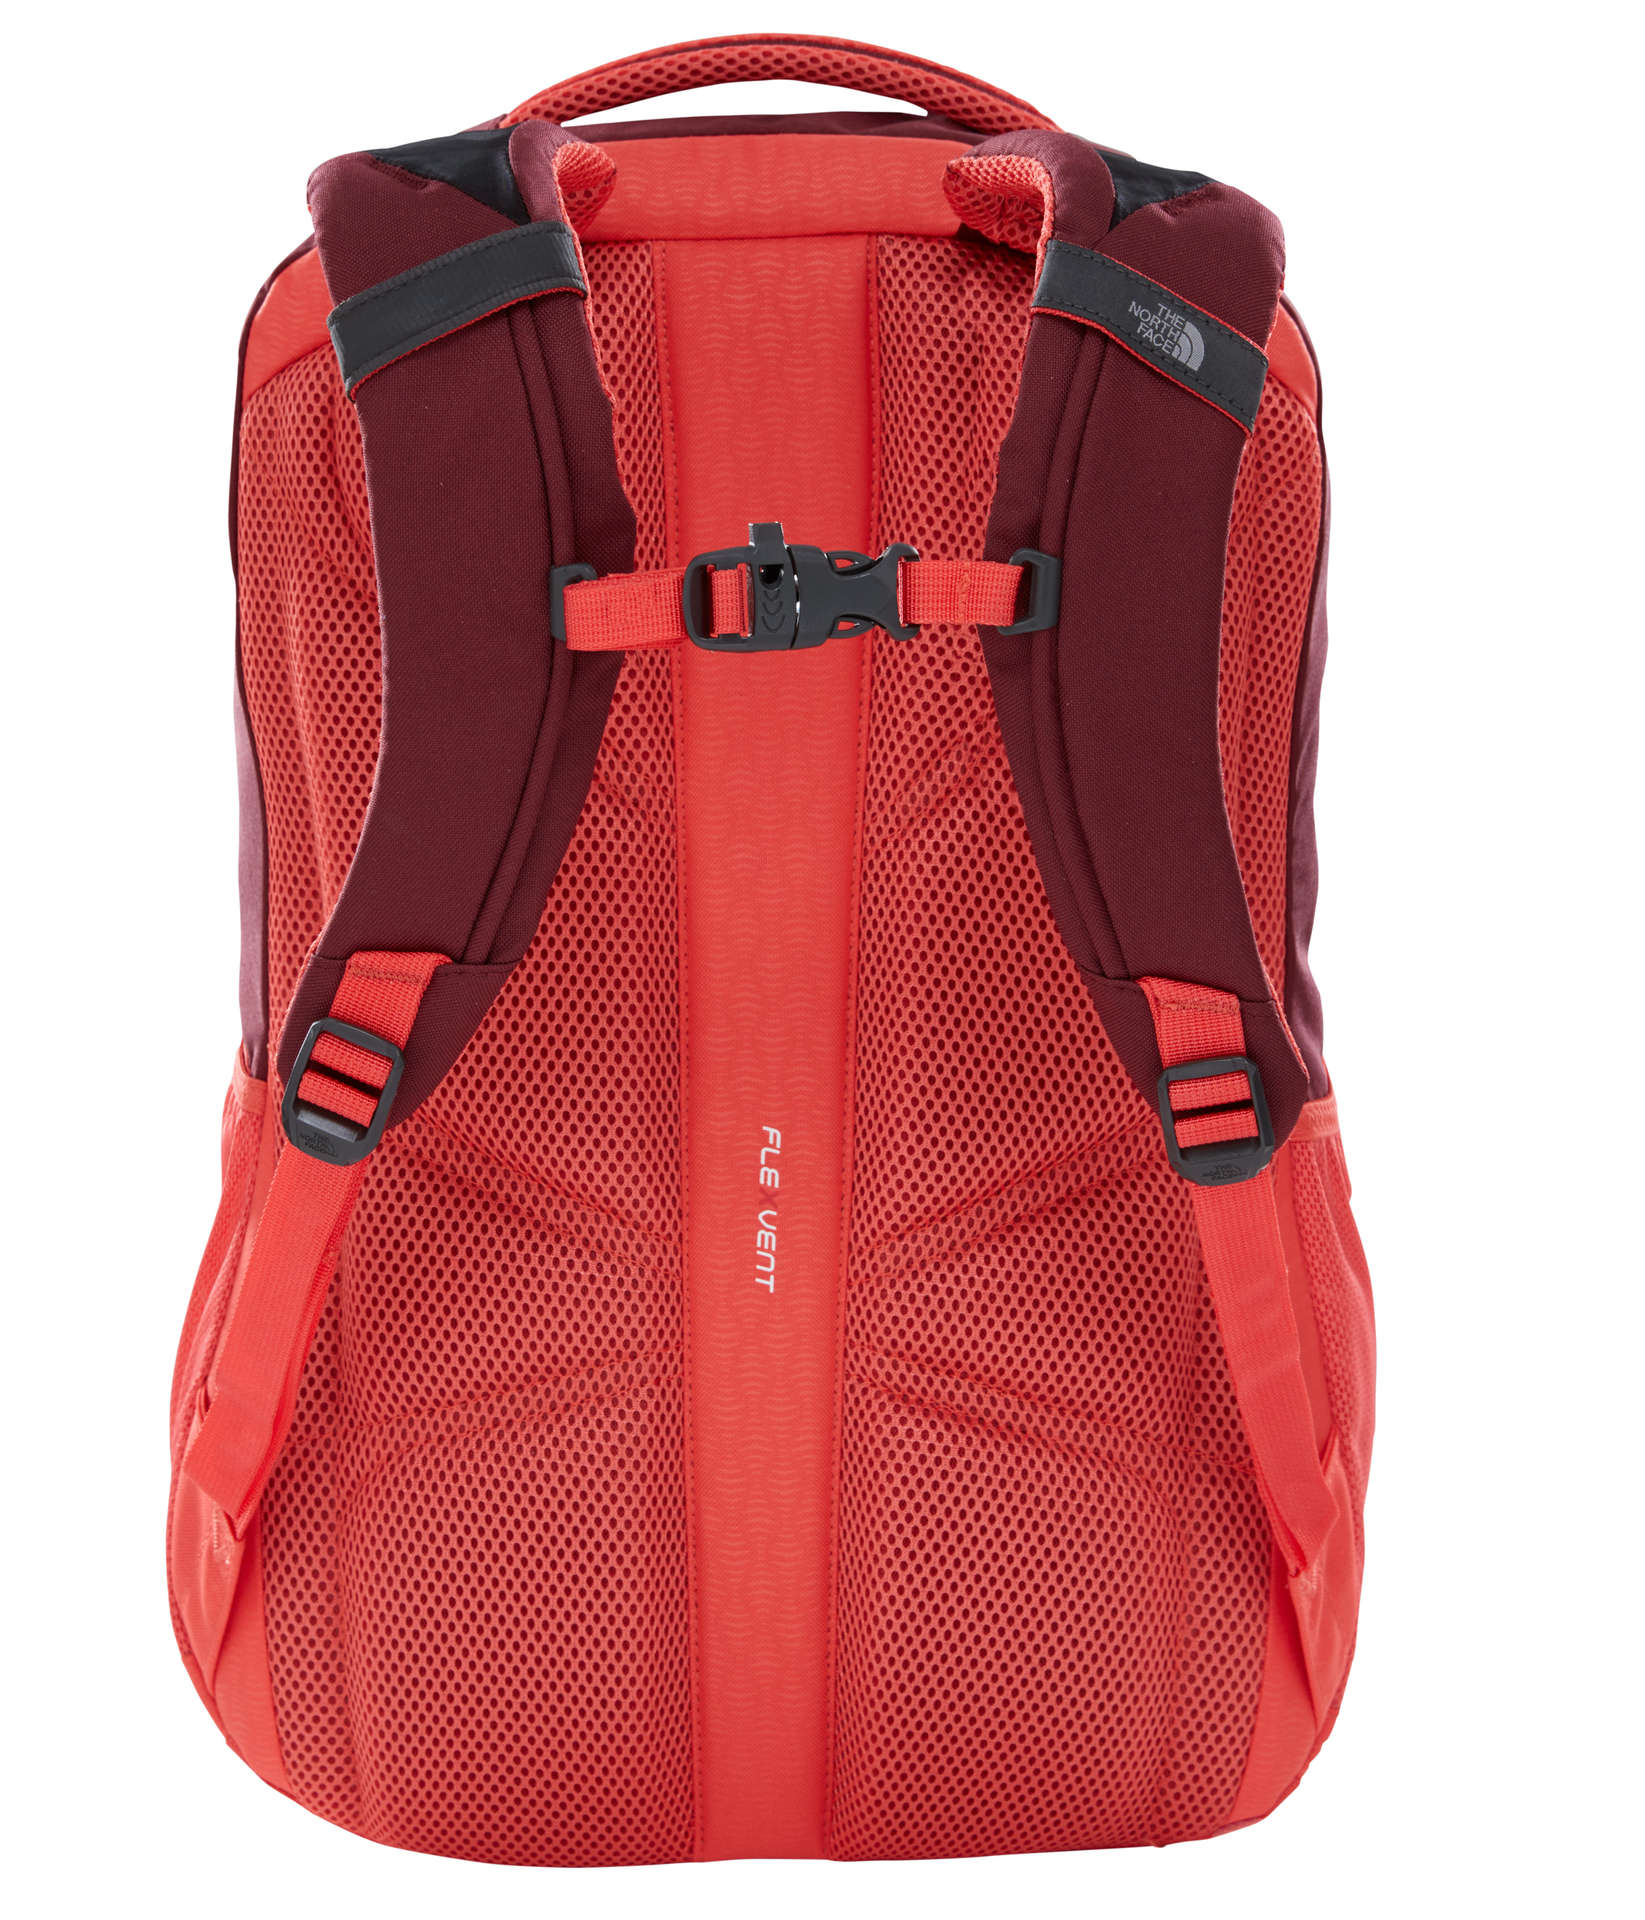 The North Face Vault Rugzak Roze/Paars Dames